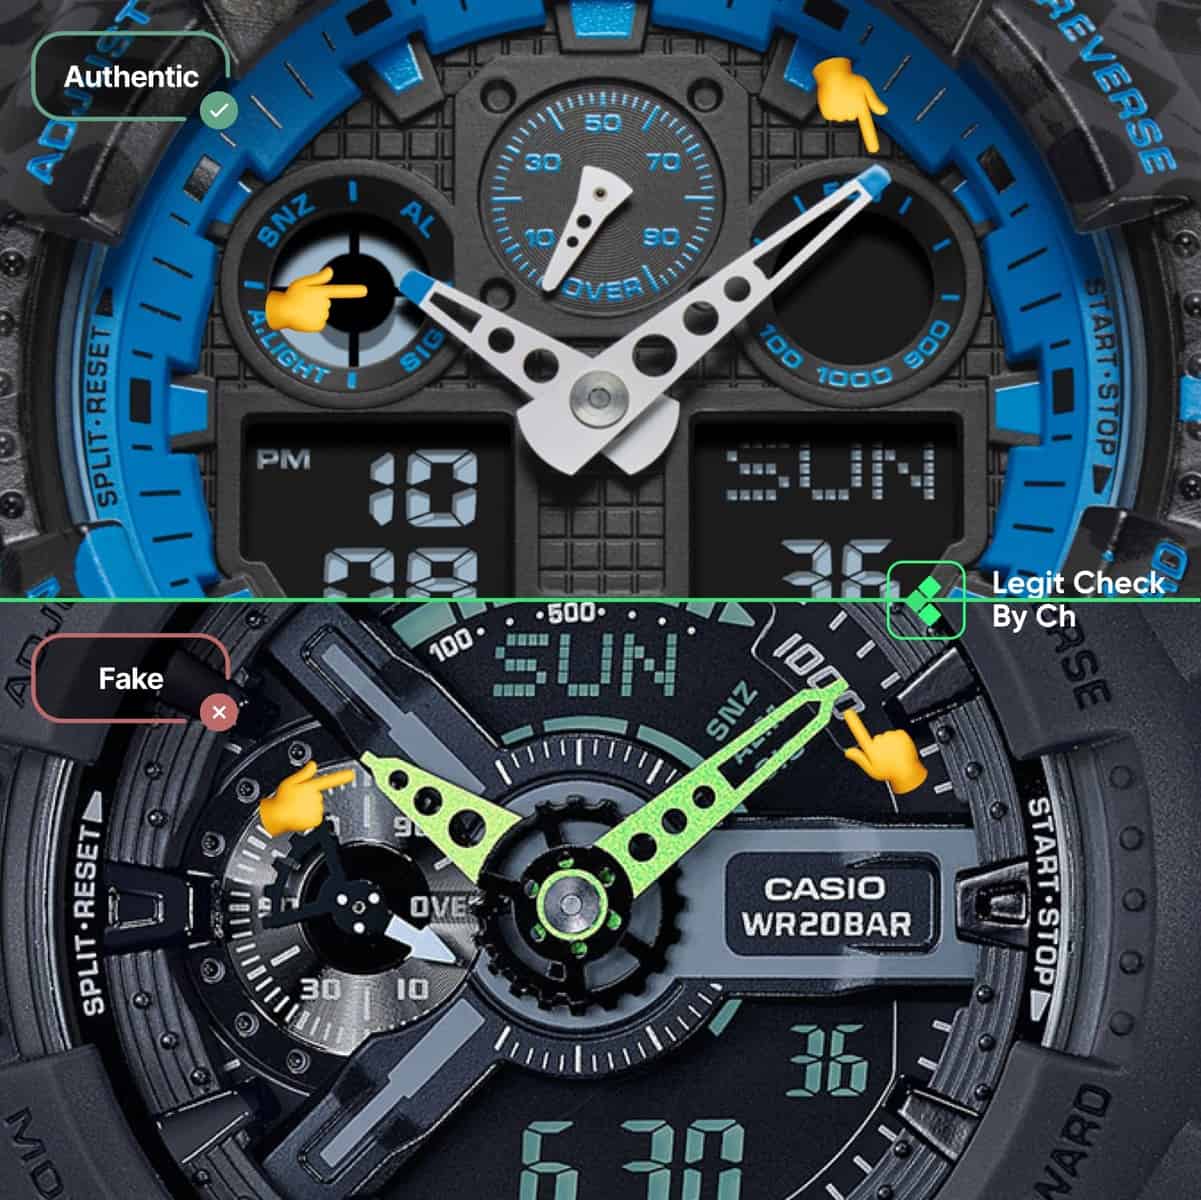 Difference Between Original G Shock And Fake | lupon.gov.ph